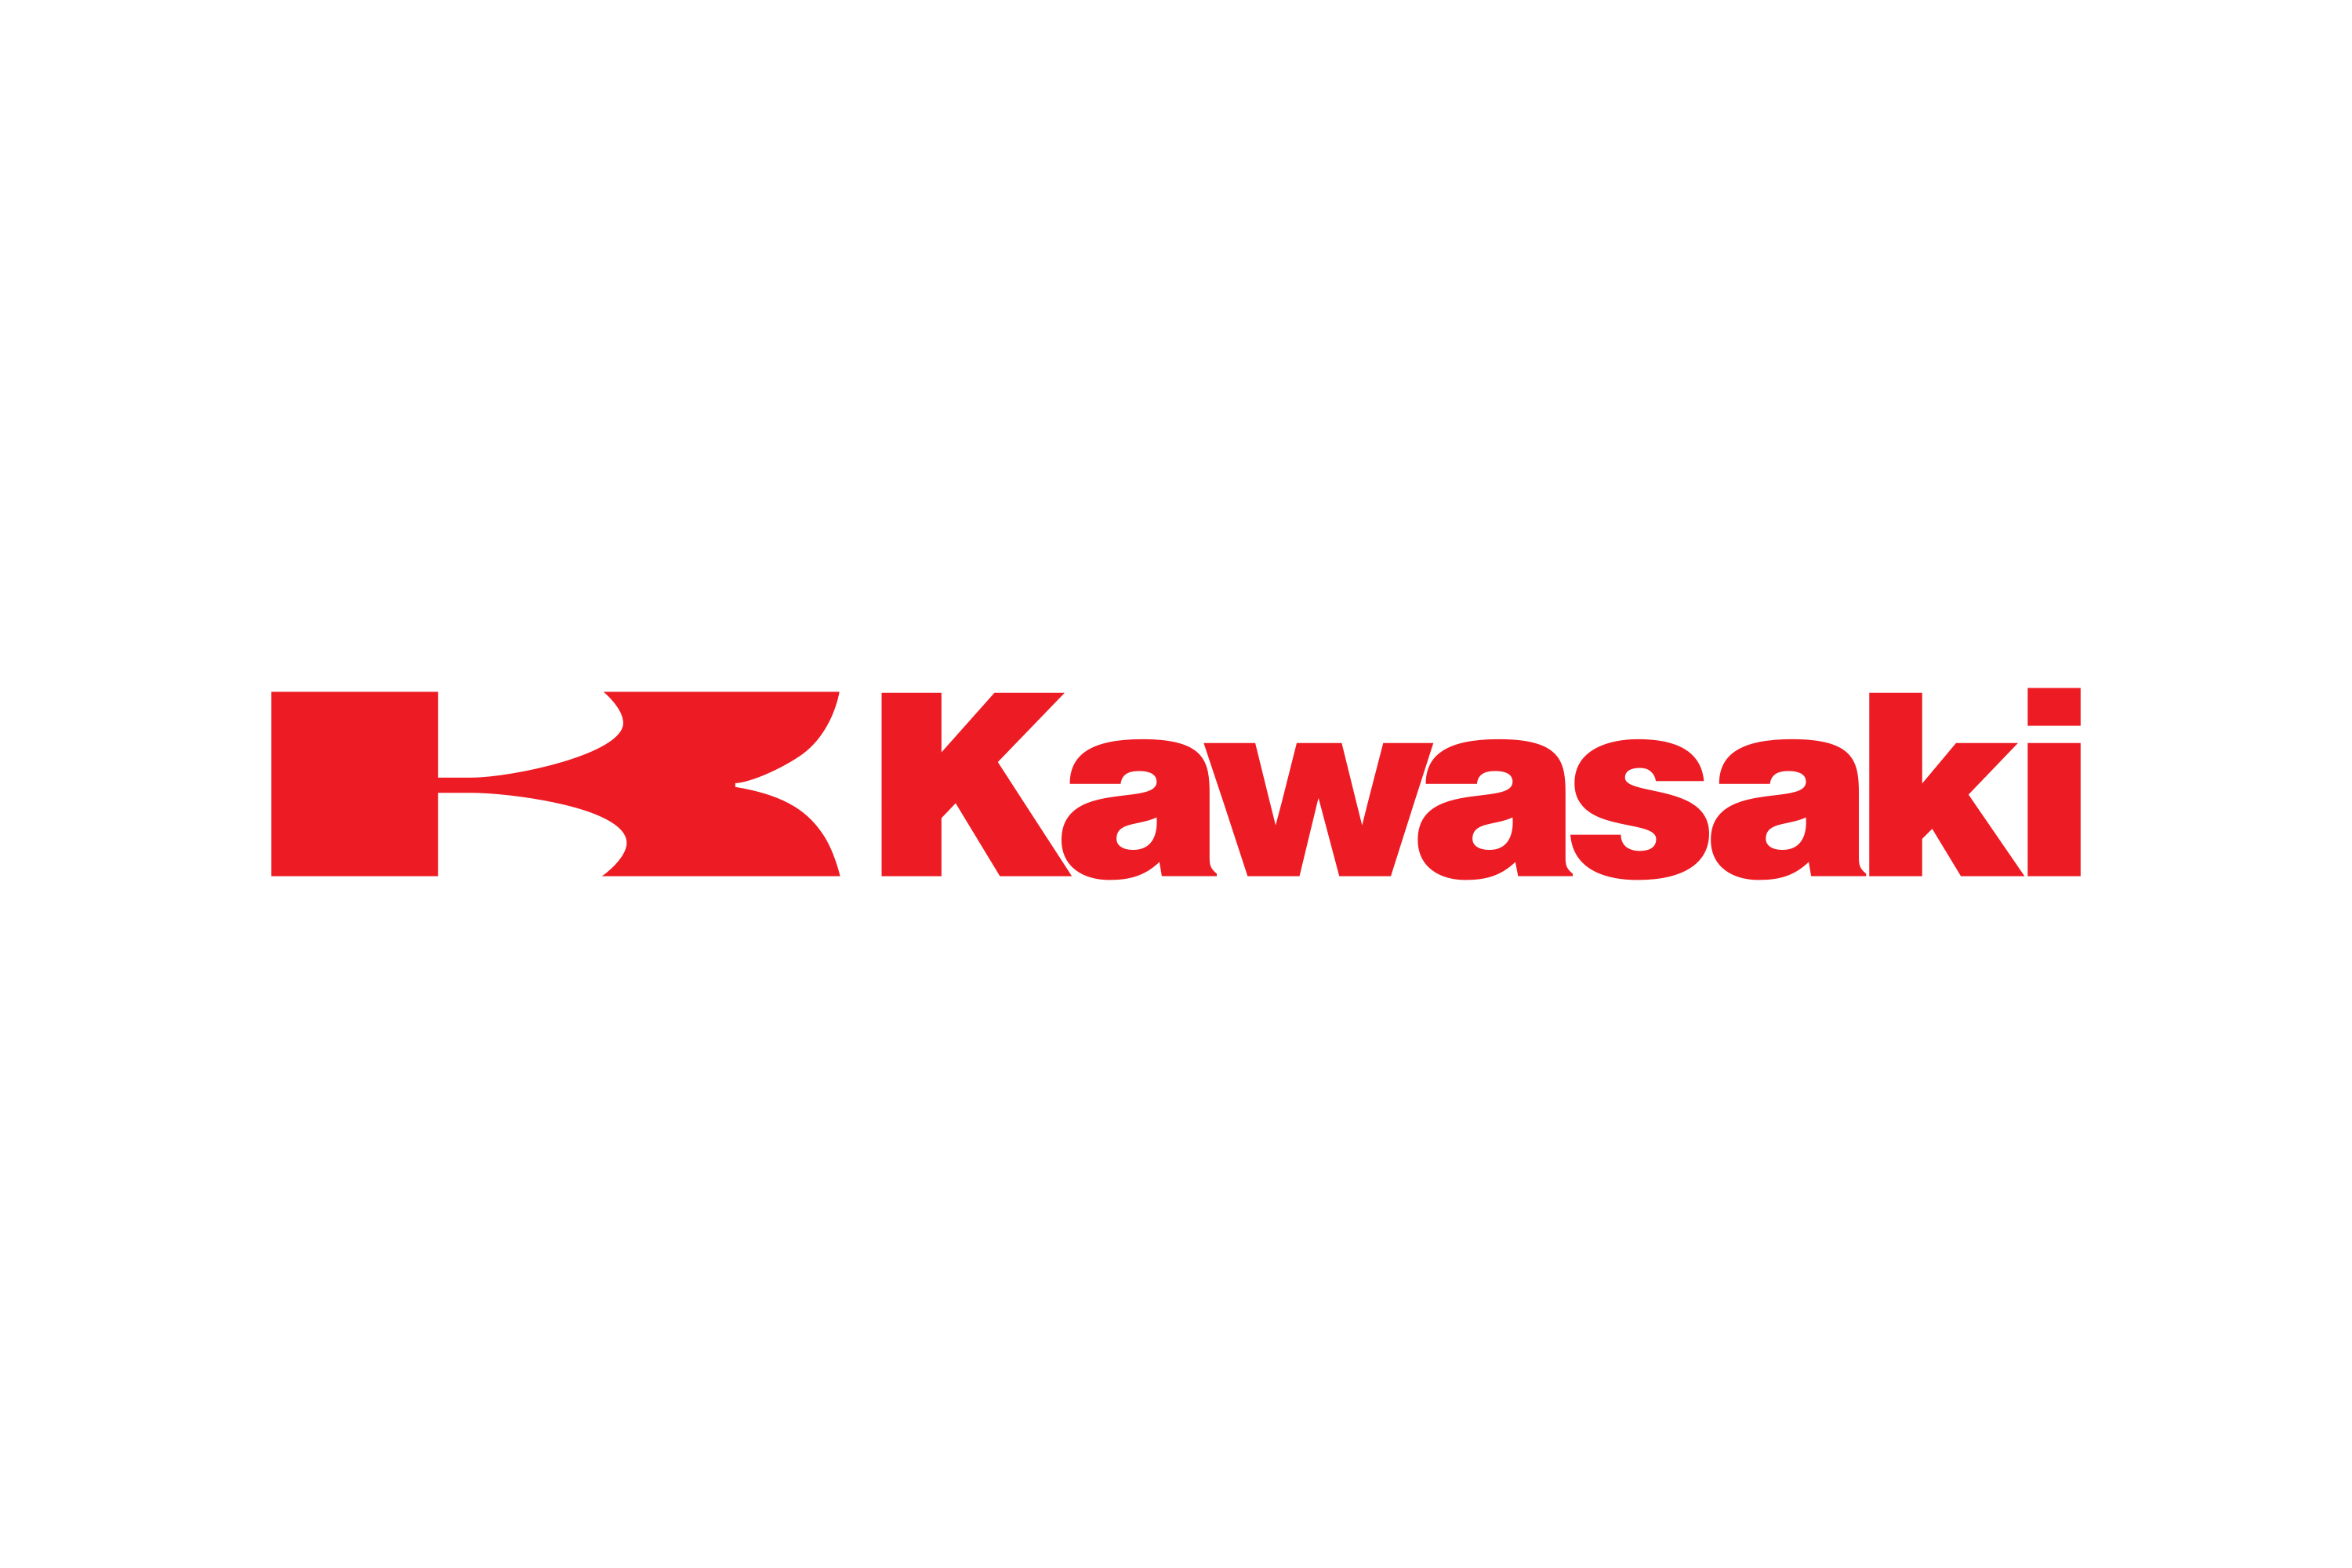 download kawasaki heavy industries motorcycle engine logo in svg vector or png file format logo wine svg vector or png file format